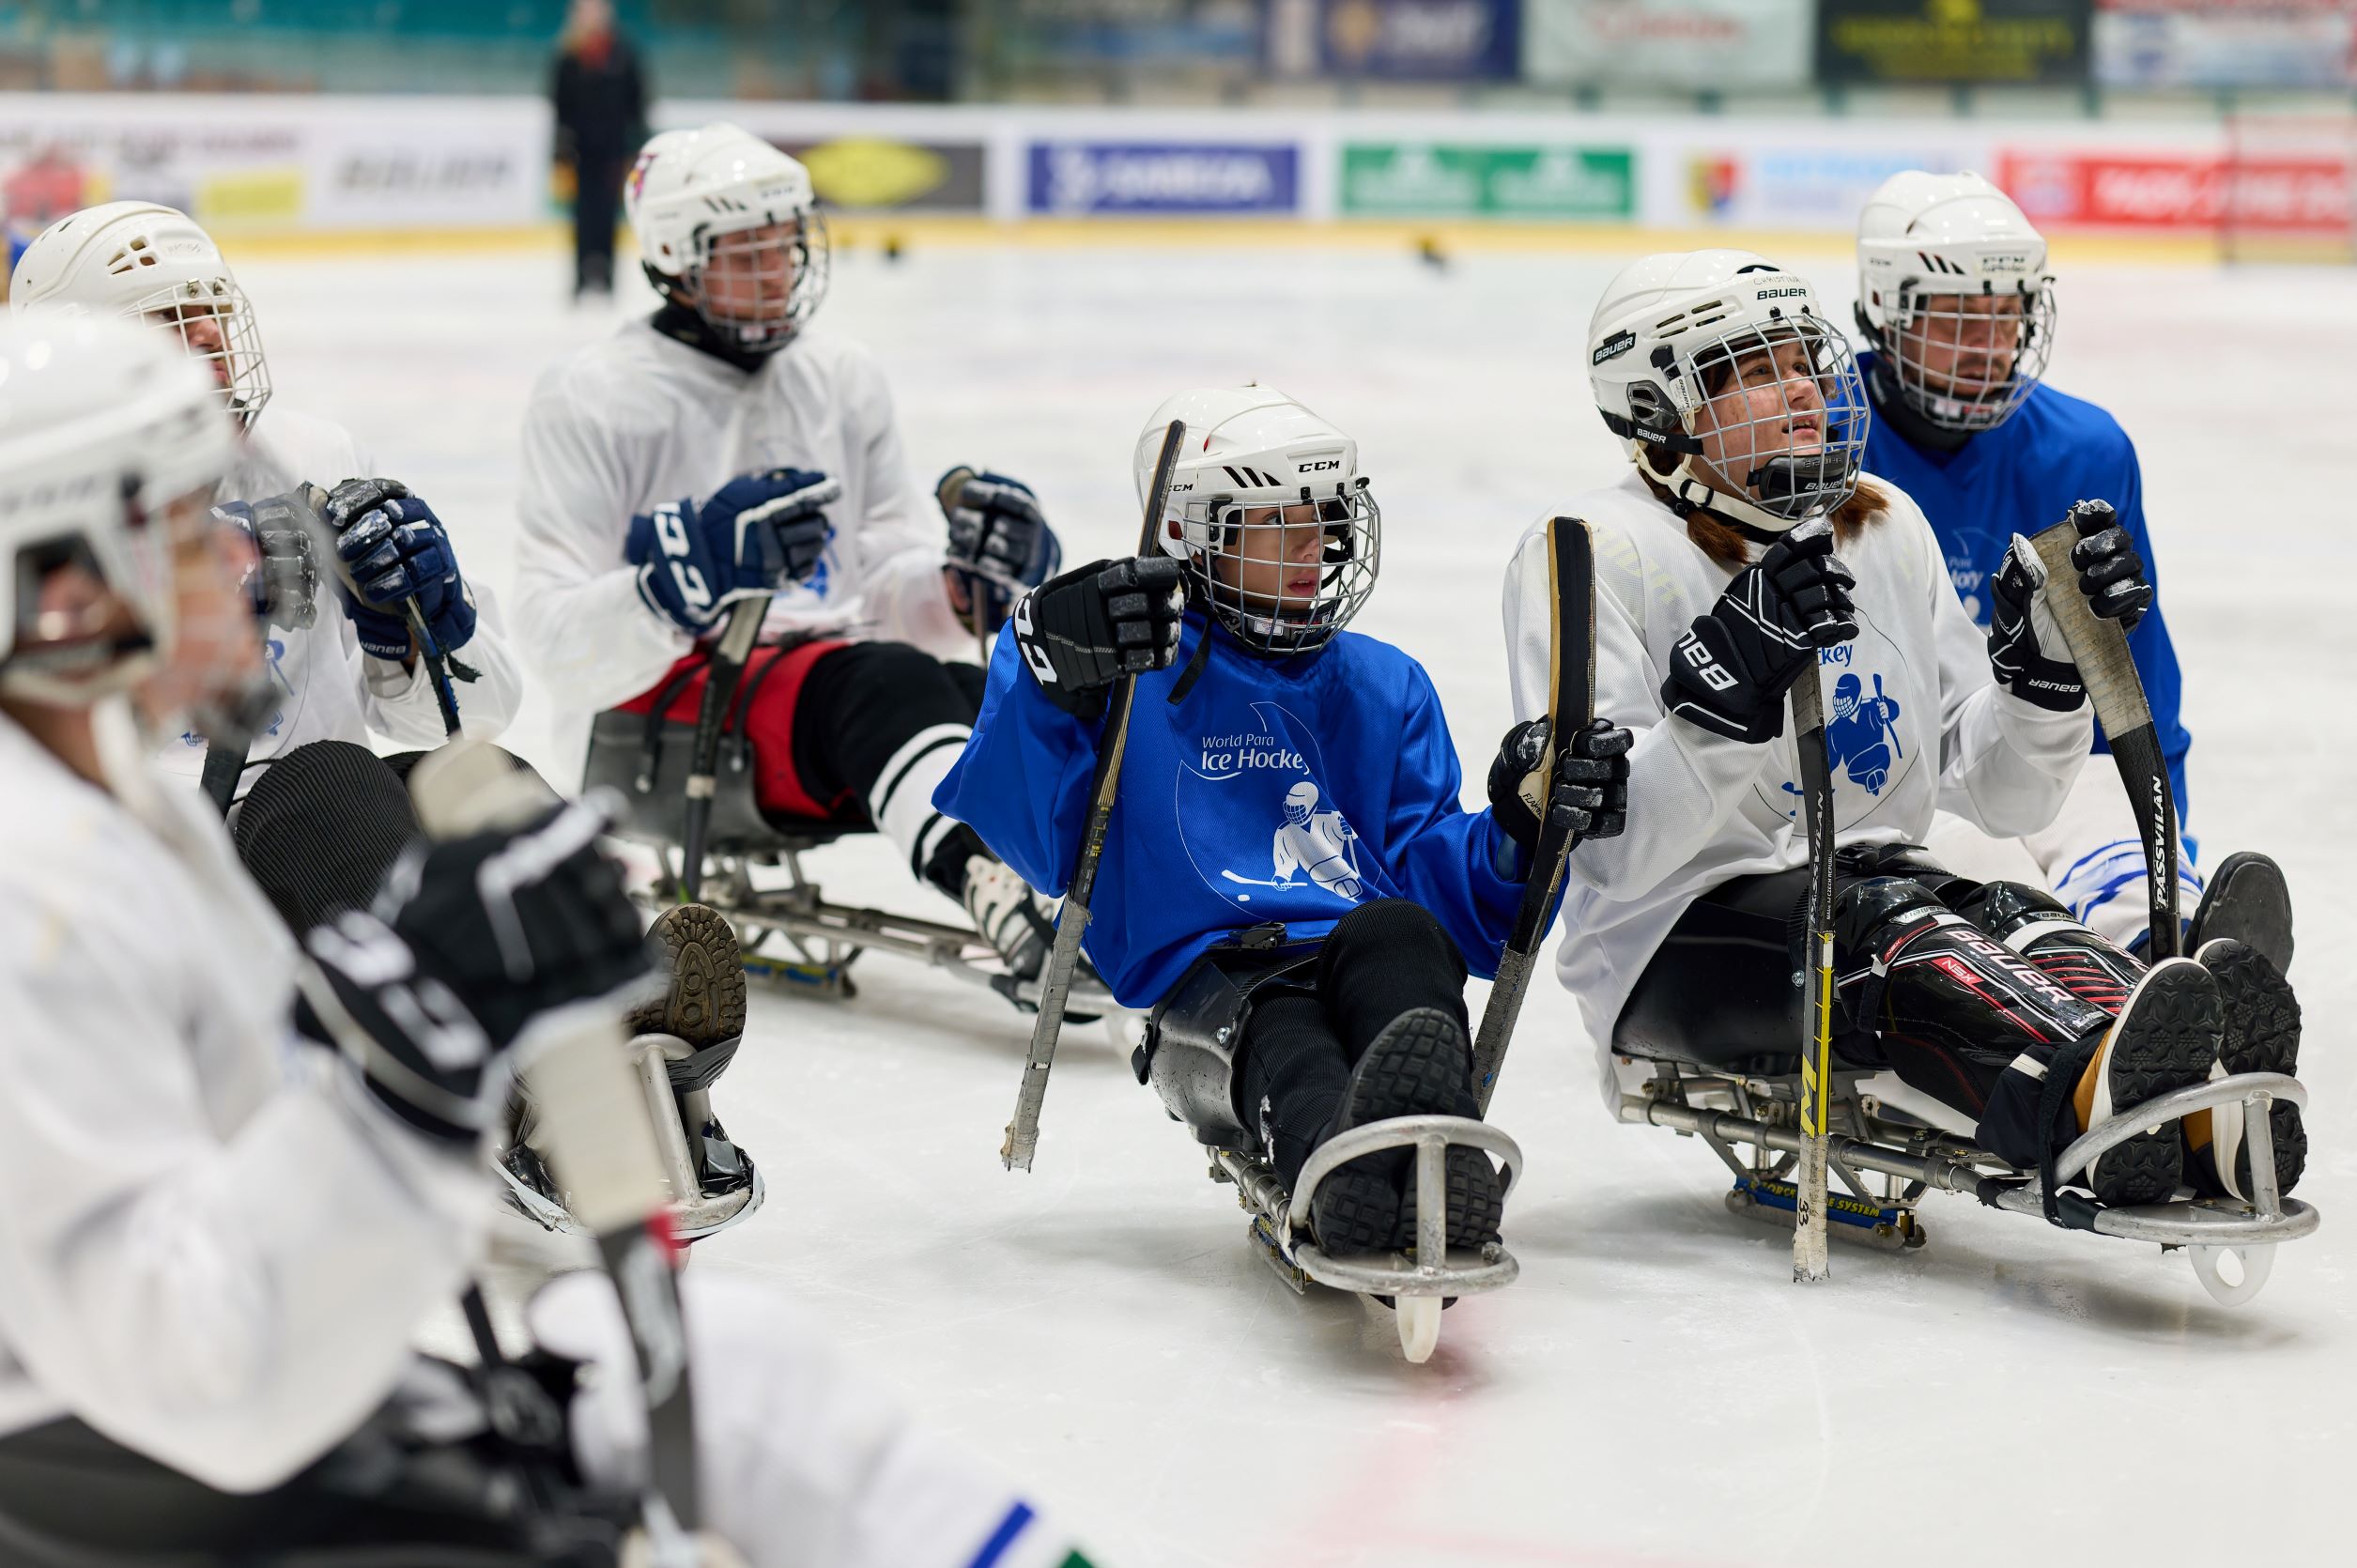 IPC development camps support female hockey players before Women’s